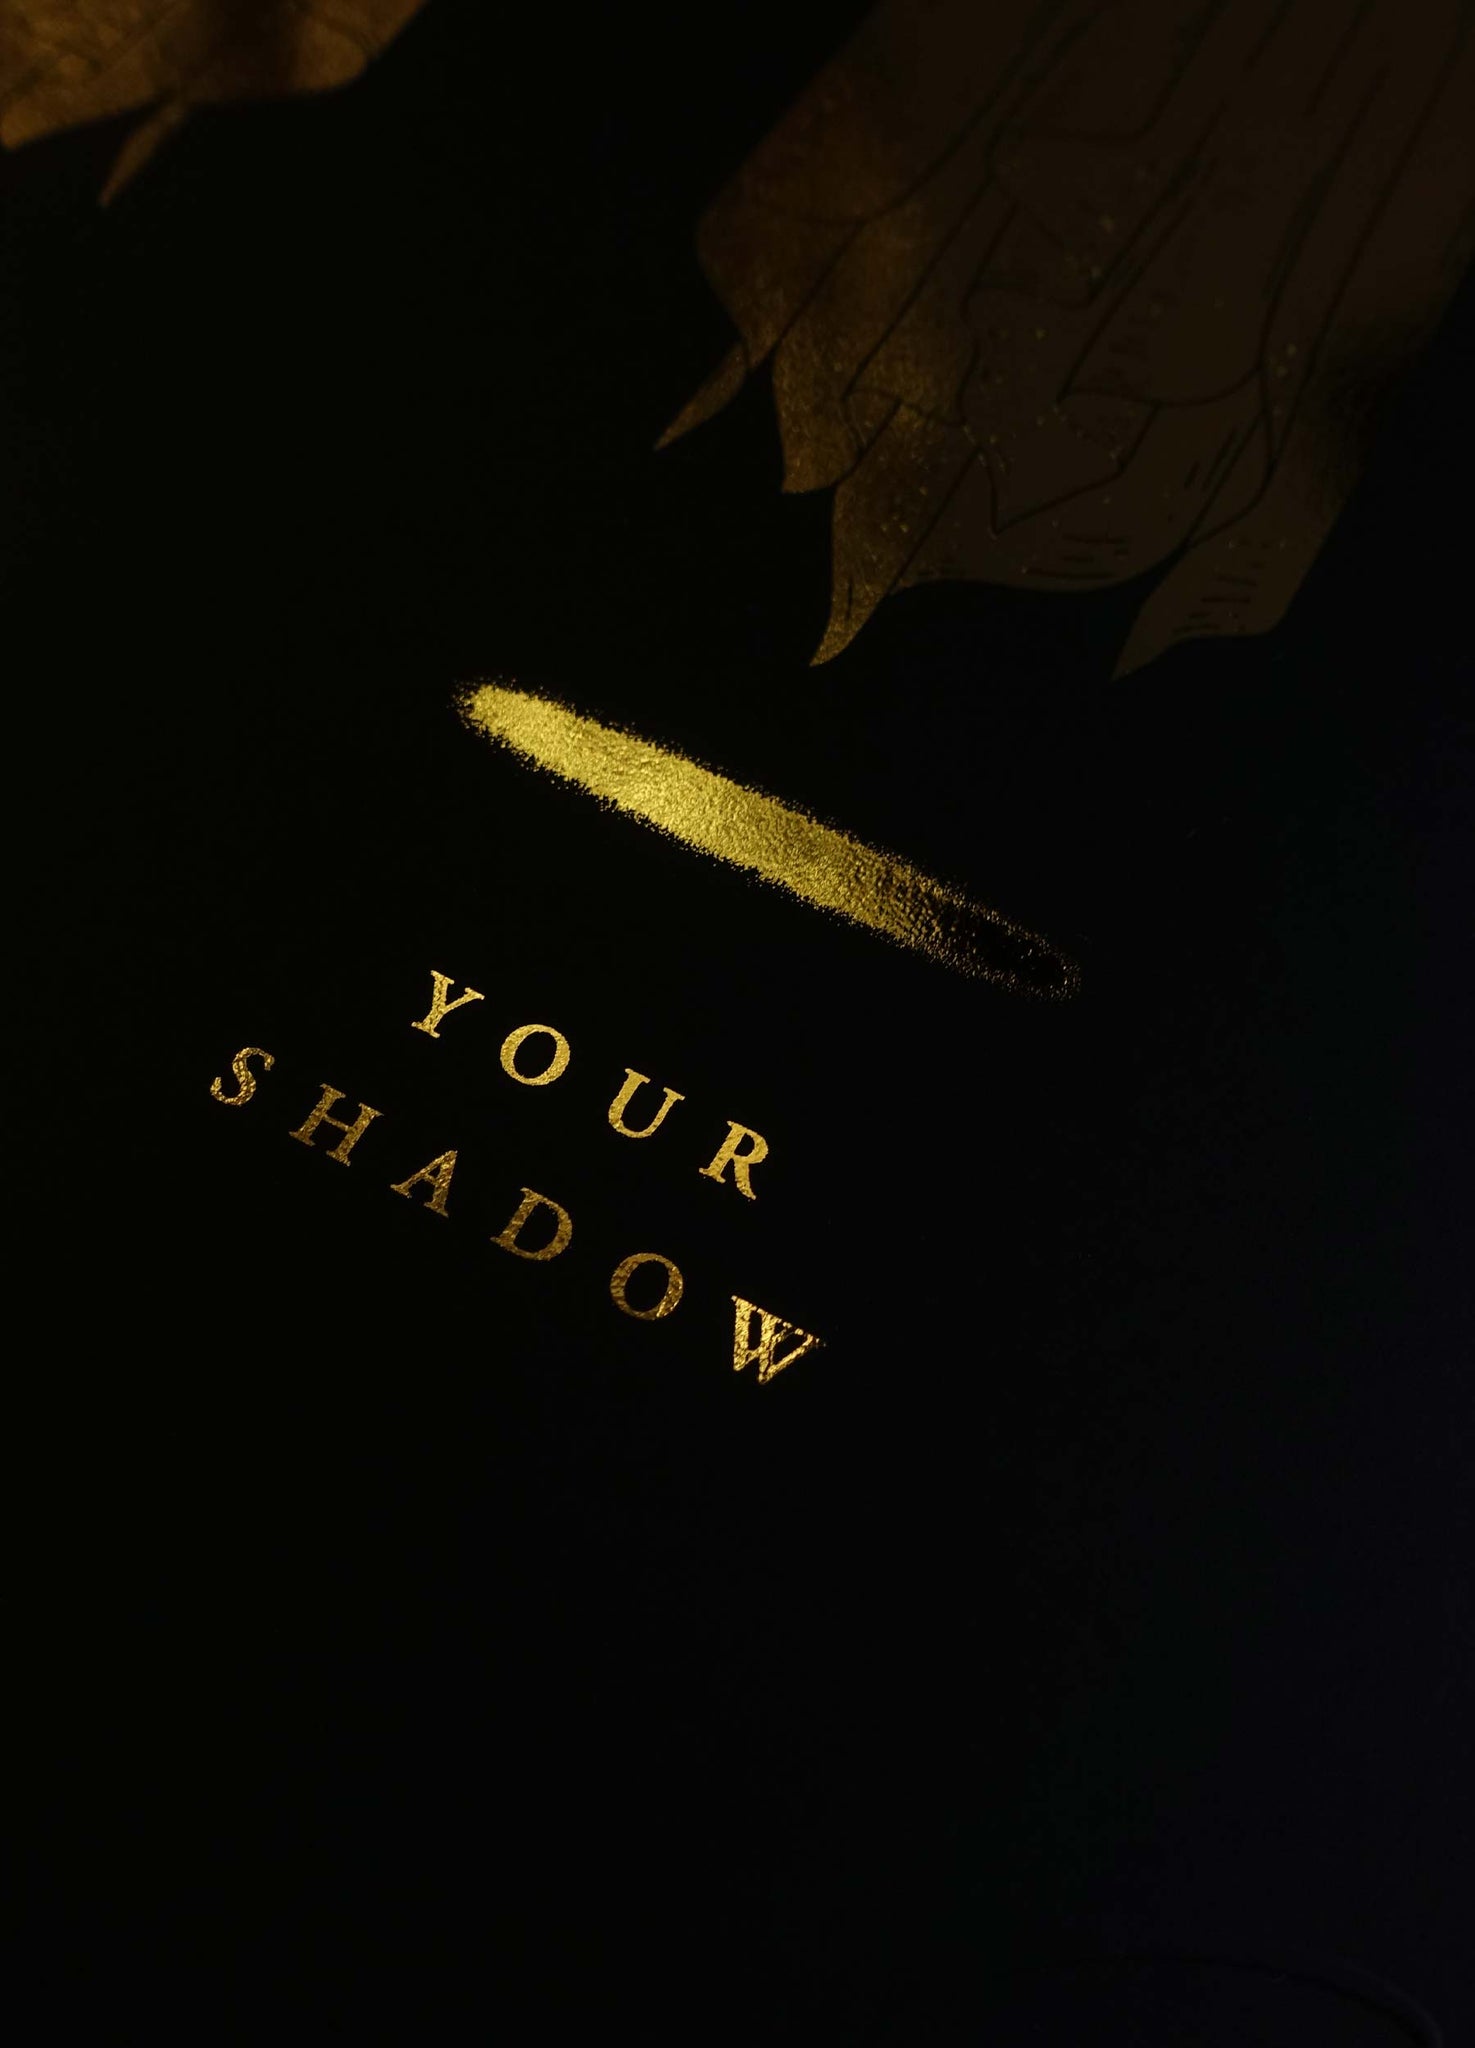 You and Your shadow two ghosts holding hands illustration gold foil on black paper art print by Cocorrina & Co